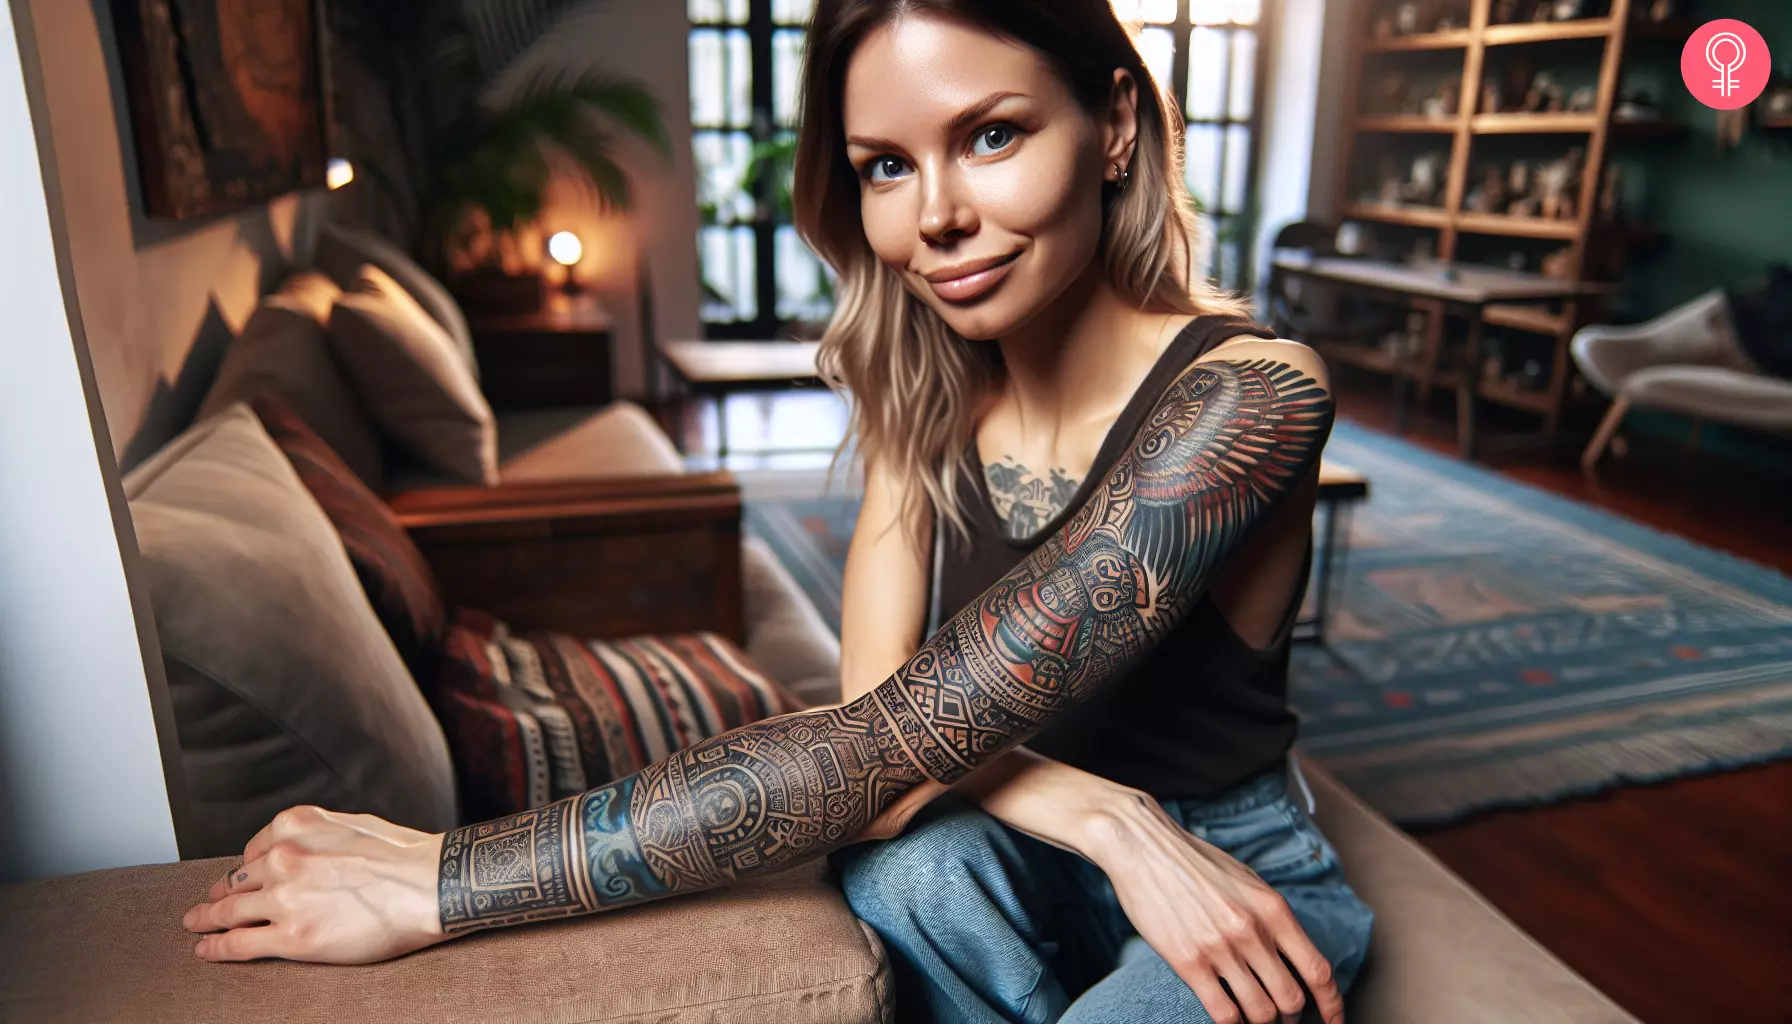 An Aztec Mayan tattoo sleeve on a woman’s arm